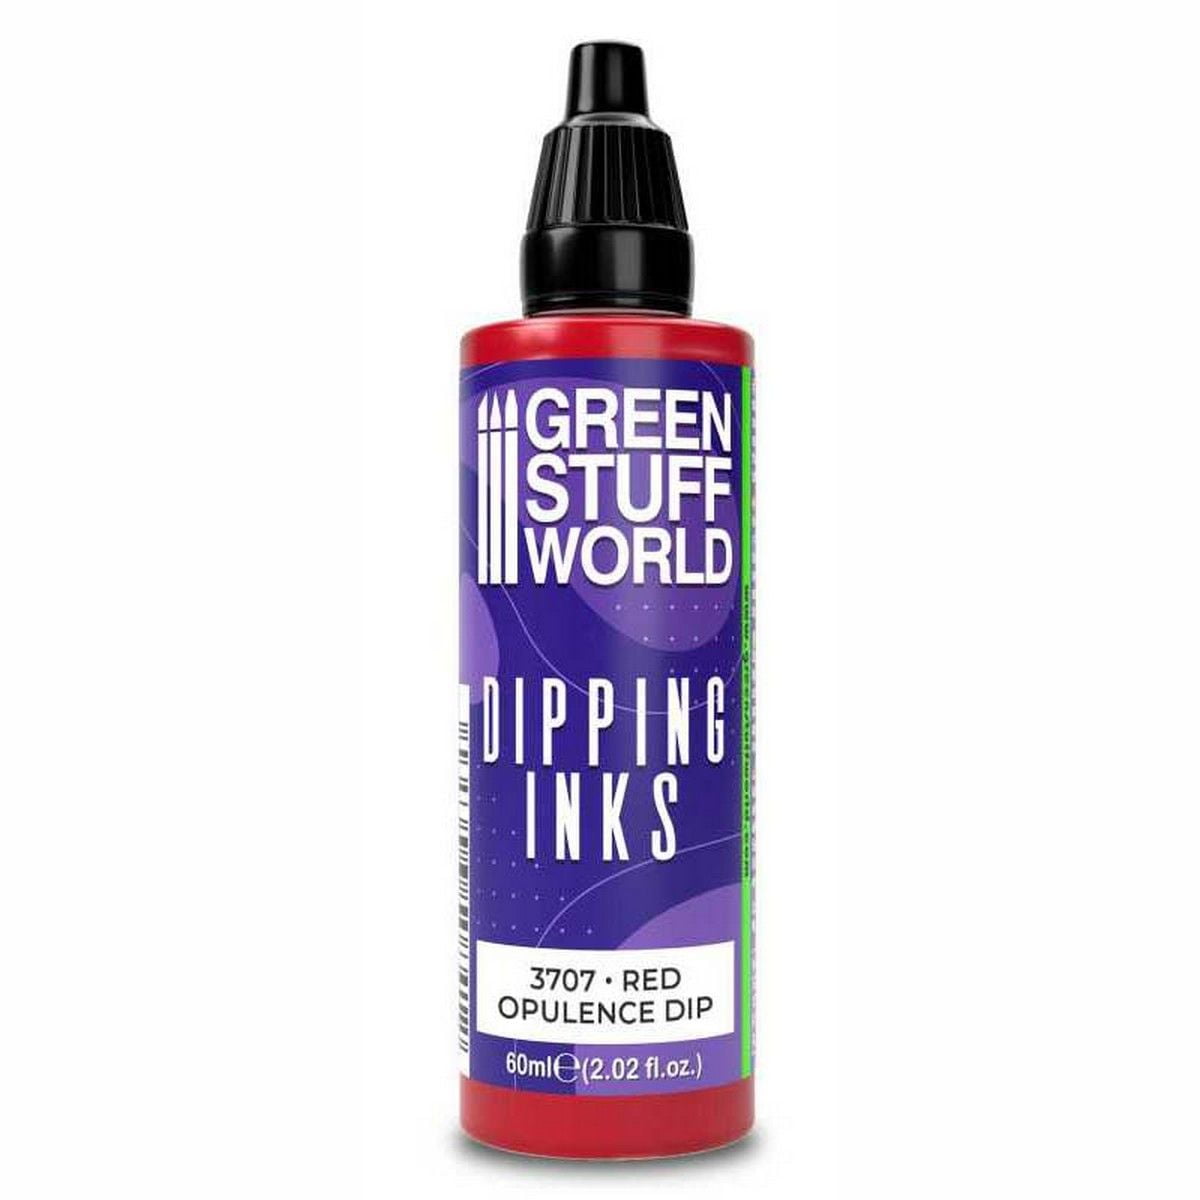 Dipping Ink 60ml - Red Opulence Dip